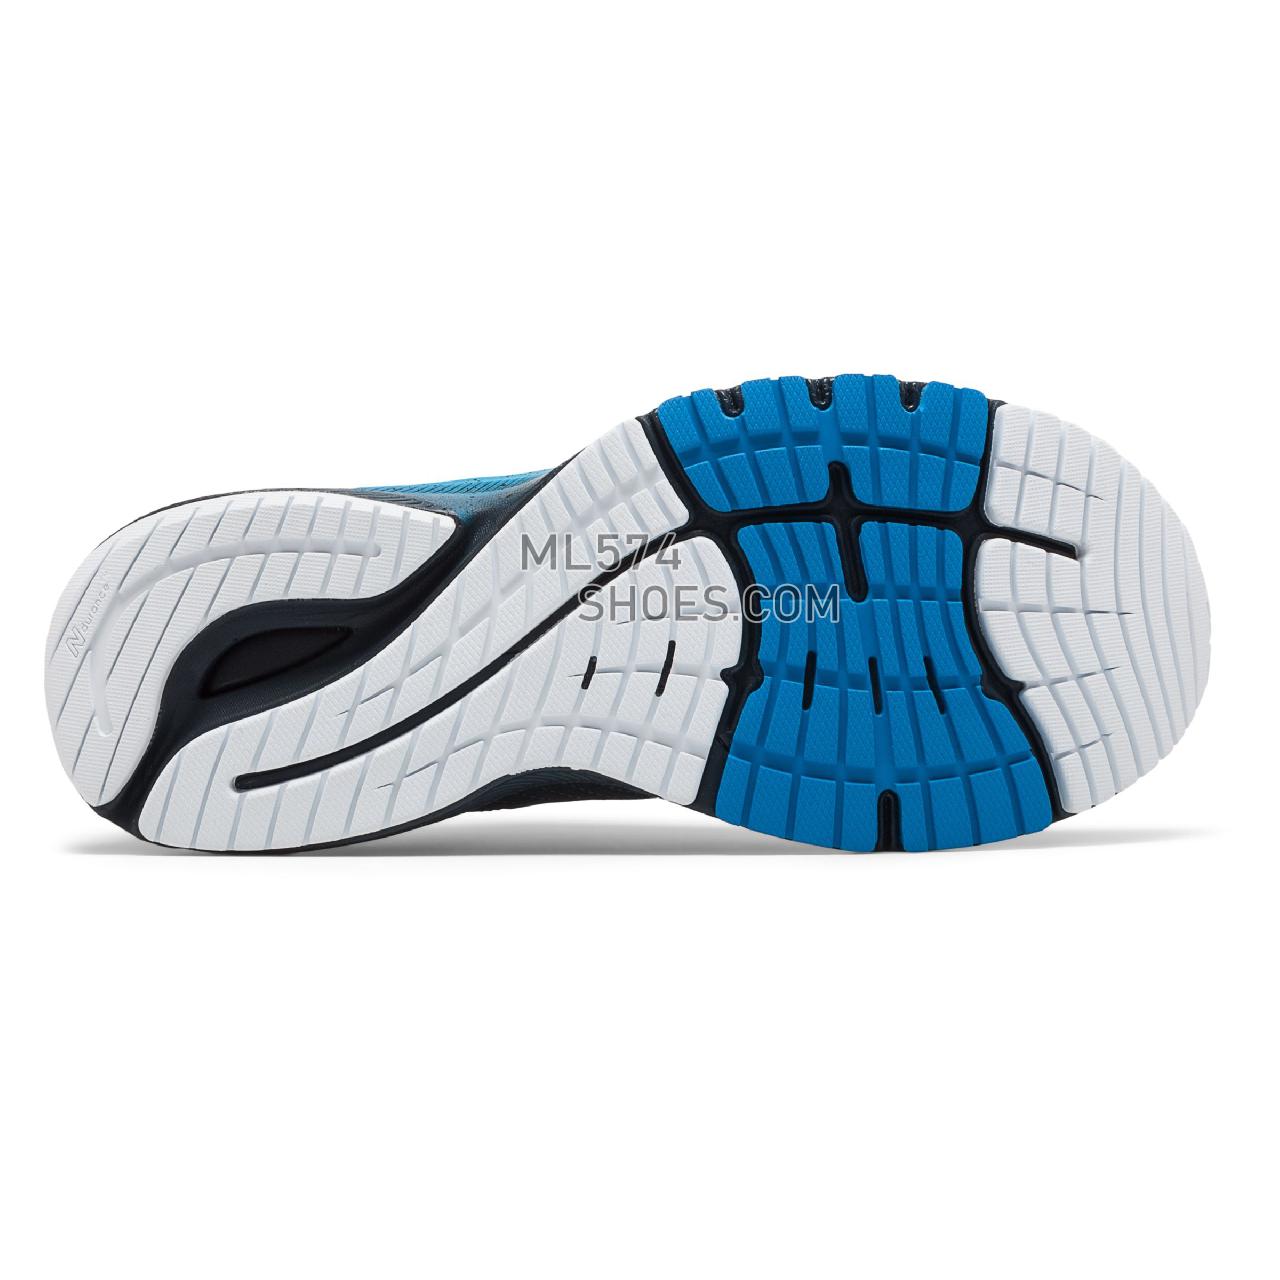 New Balance 860v10 NYC Marathon - Men's Stability Running - Outerspace with Thunder and Lapis Blue - M860Y10